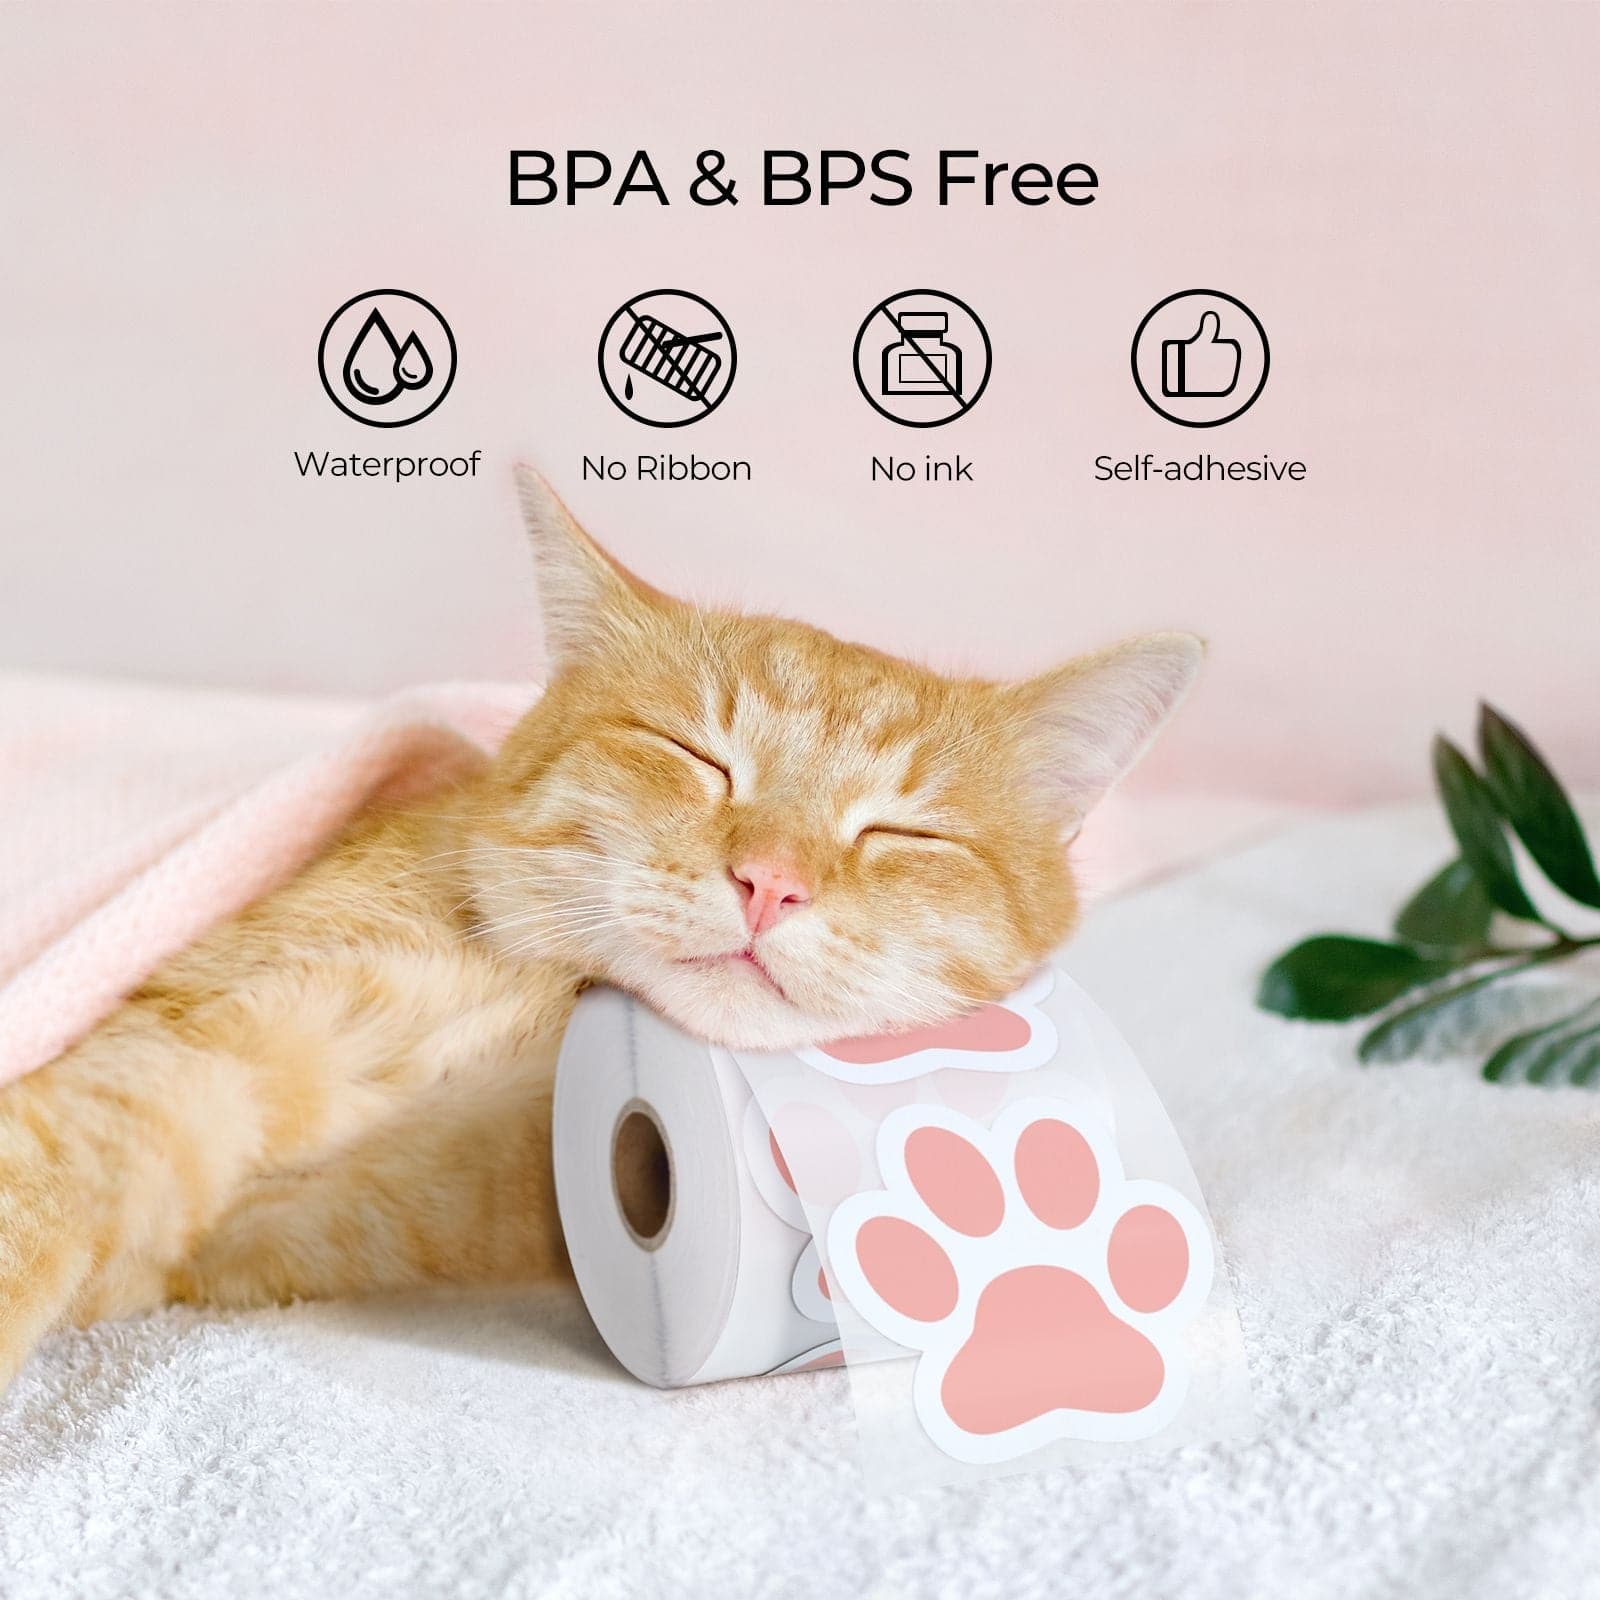 Print personalized pet paw stickers which is BPA & BPS Free and waterproof.